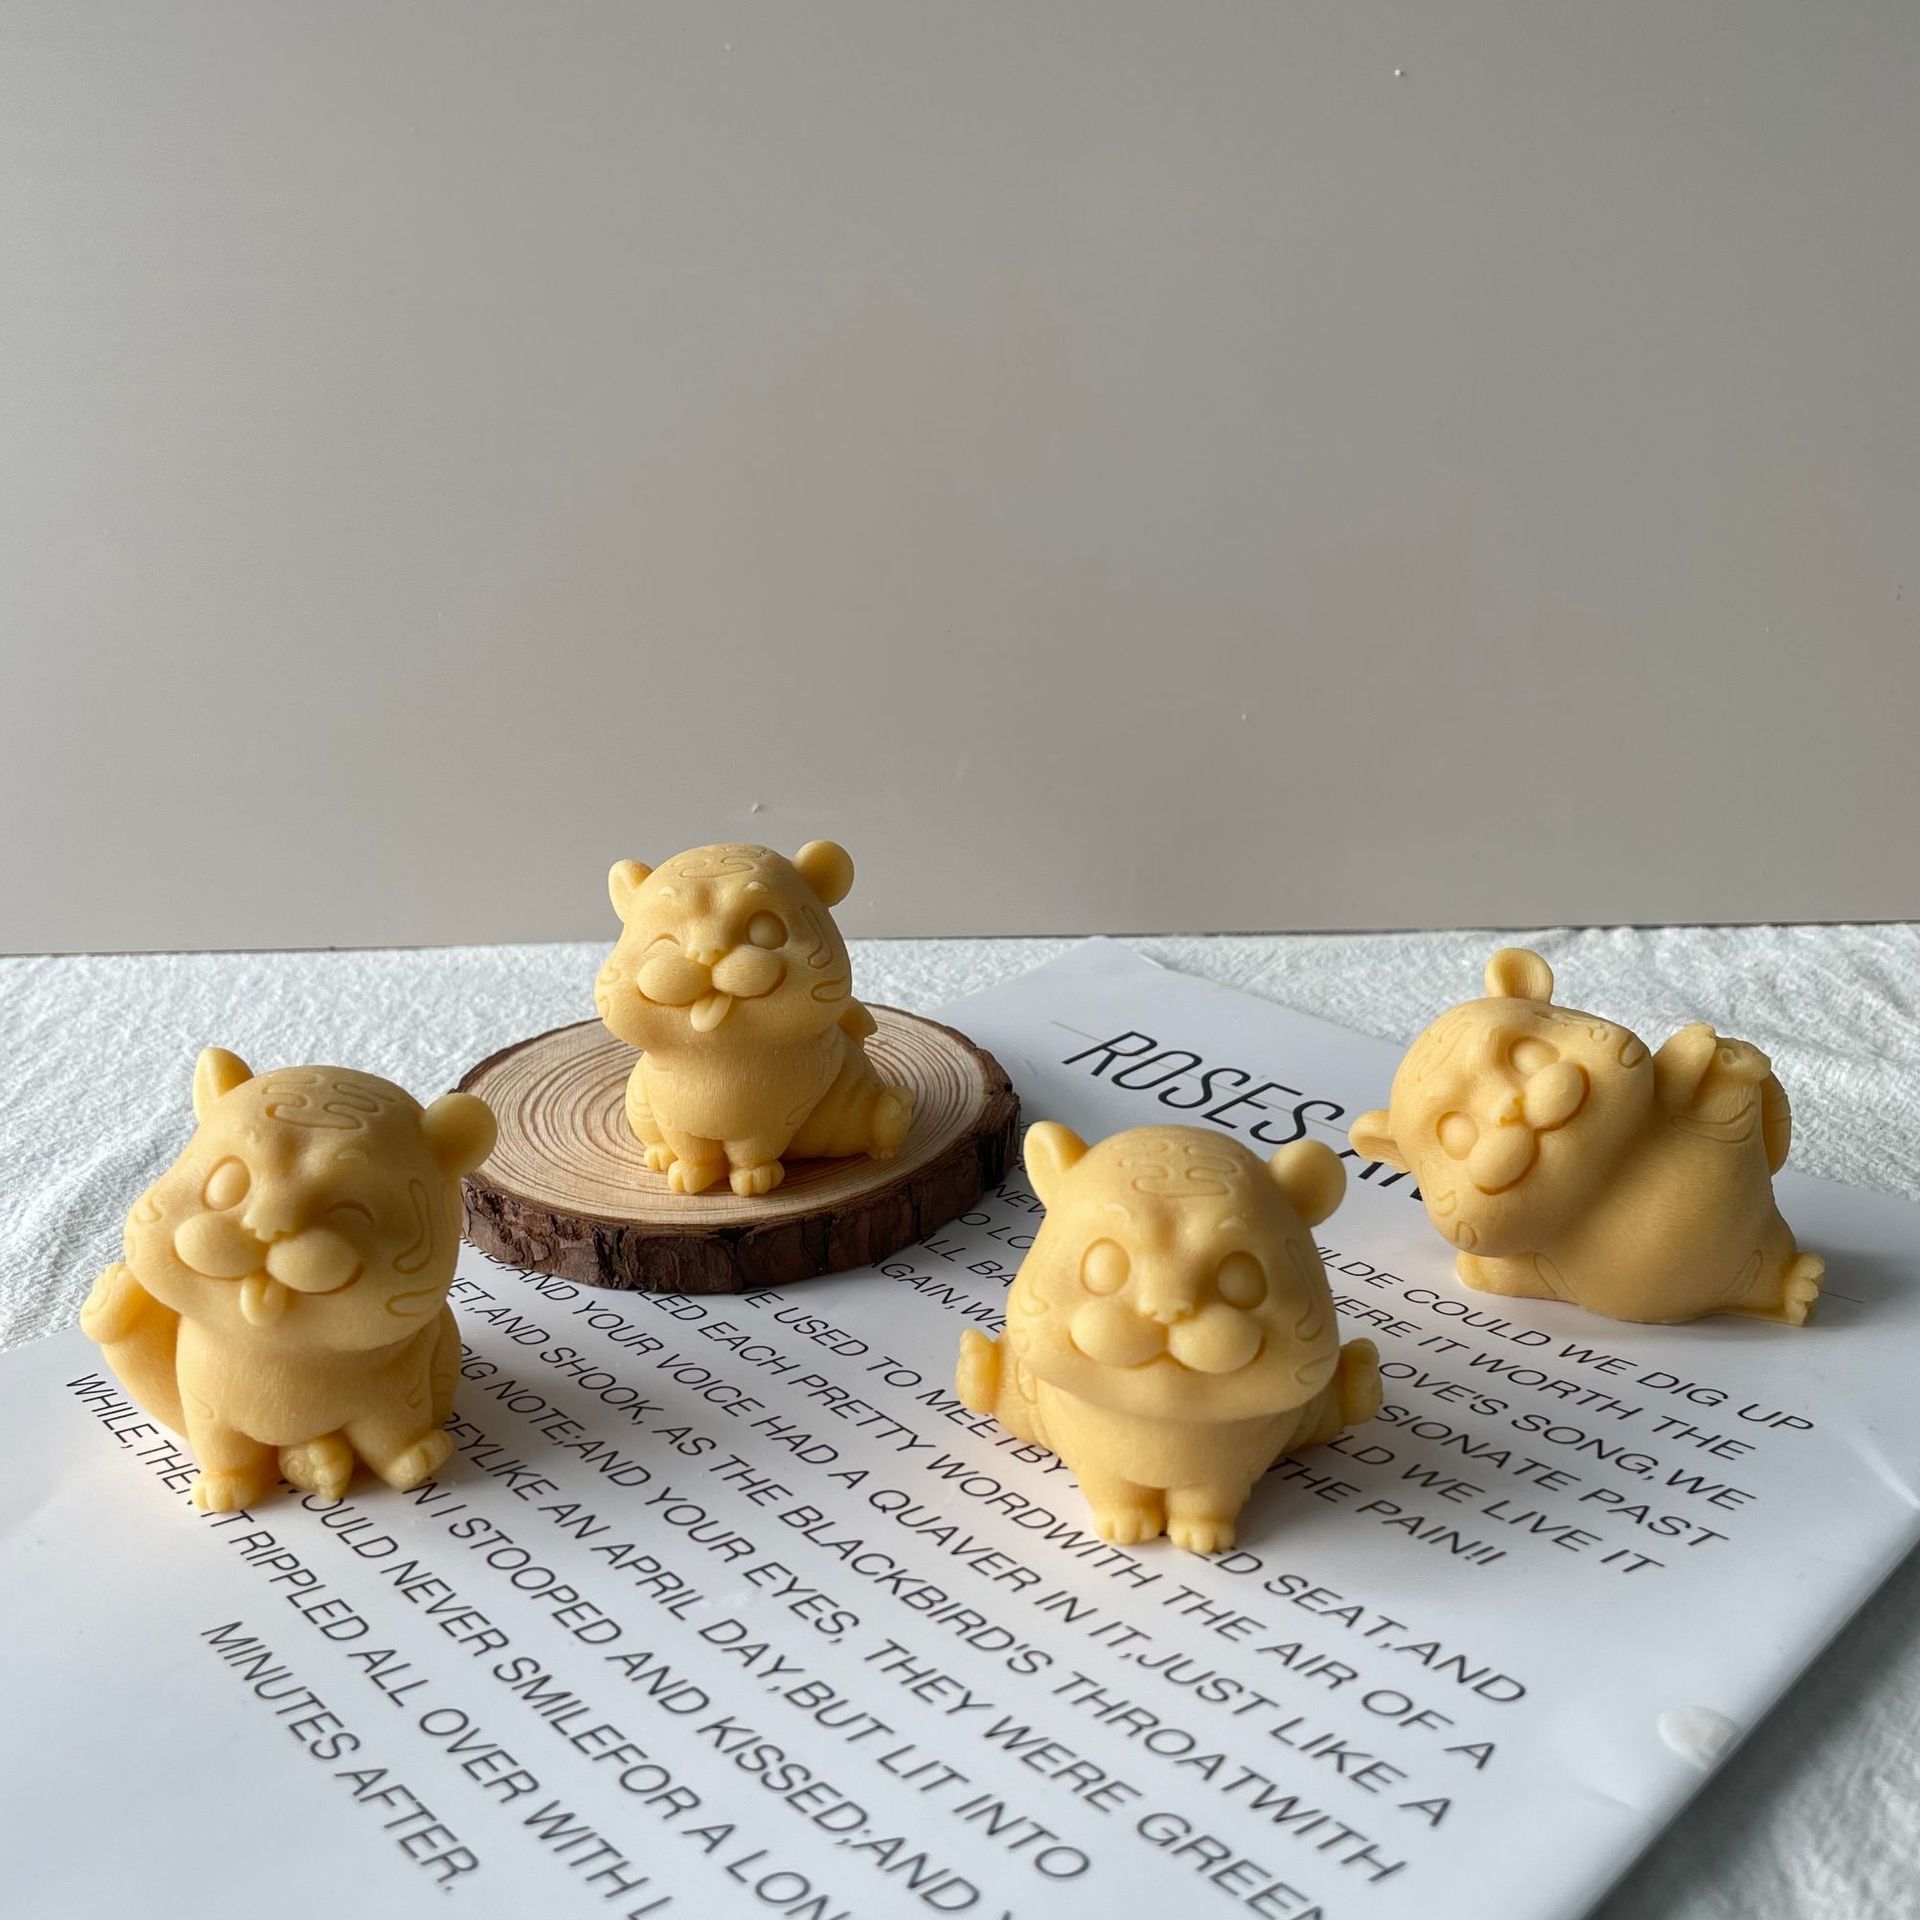 J6-96 2022 New Design Cute Tiger Silicone Soap Mold DIY Gypsum Ornaments Making Mold 3D Tiger Silicone Candle Mold